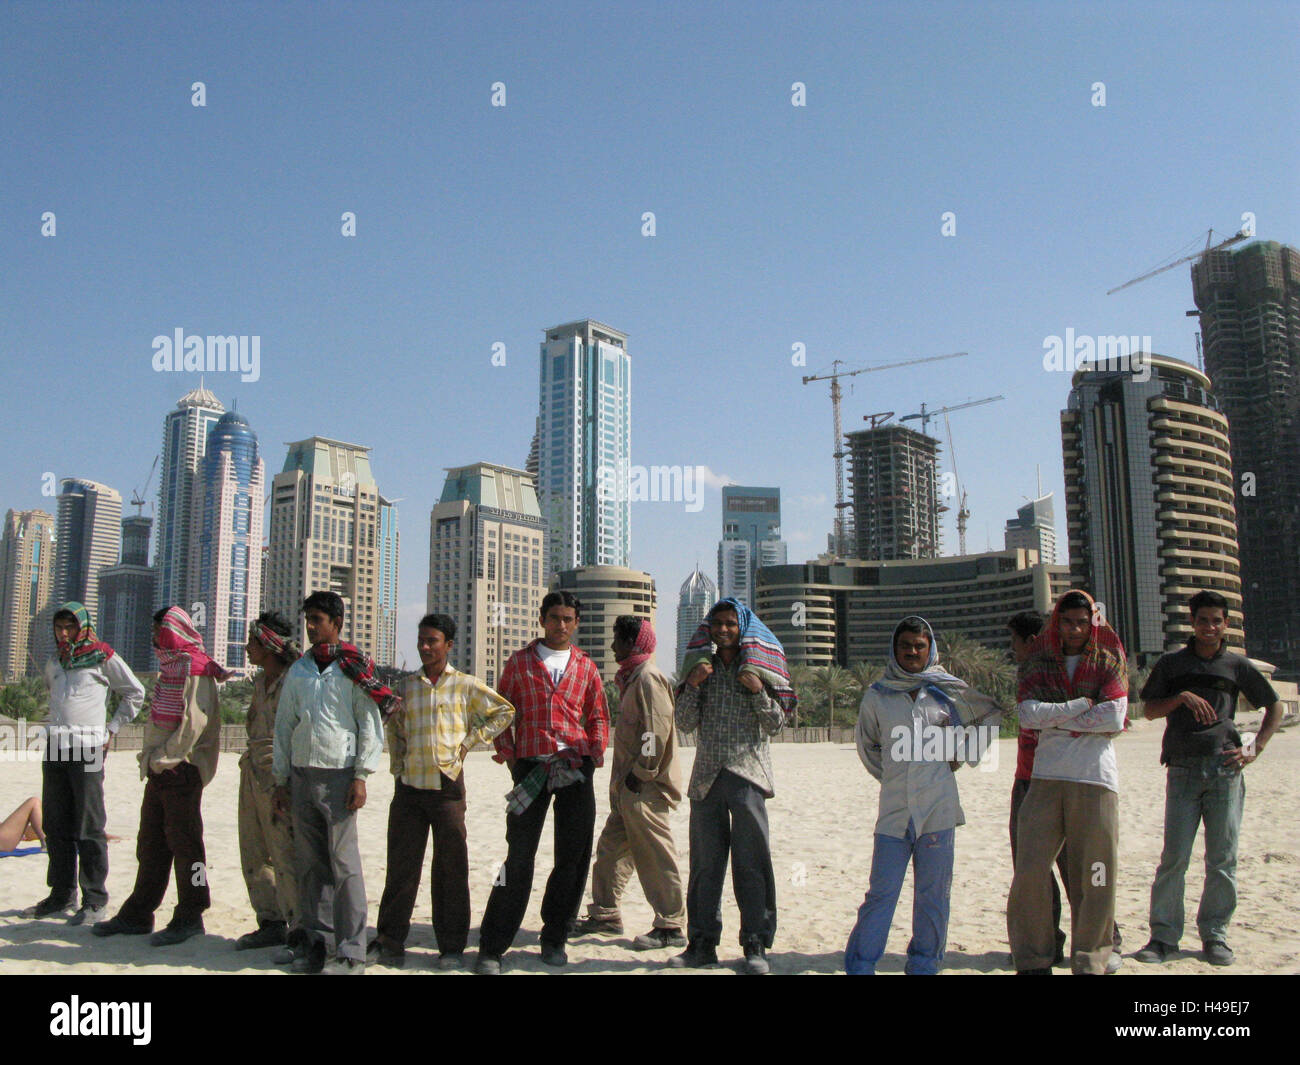 United Arab Emirates, Dubai, Jumeirah Beach, high rises, workers, group, stand, town, part town, hotels, hotel buildings, flatlets, high rises, architecture, skyline, tourism, destination, beach, person, men, outside, group picture, cranes, Stock Photo